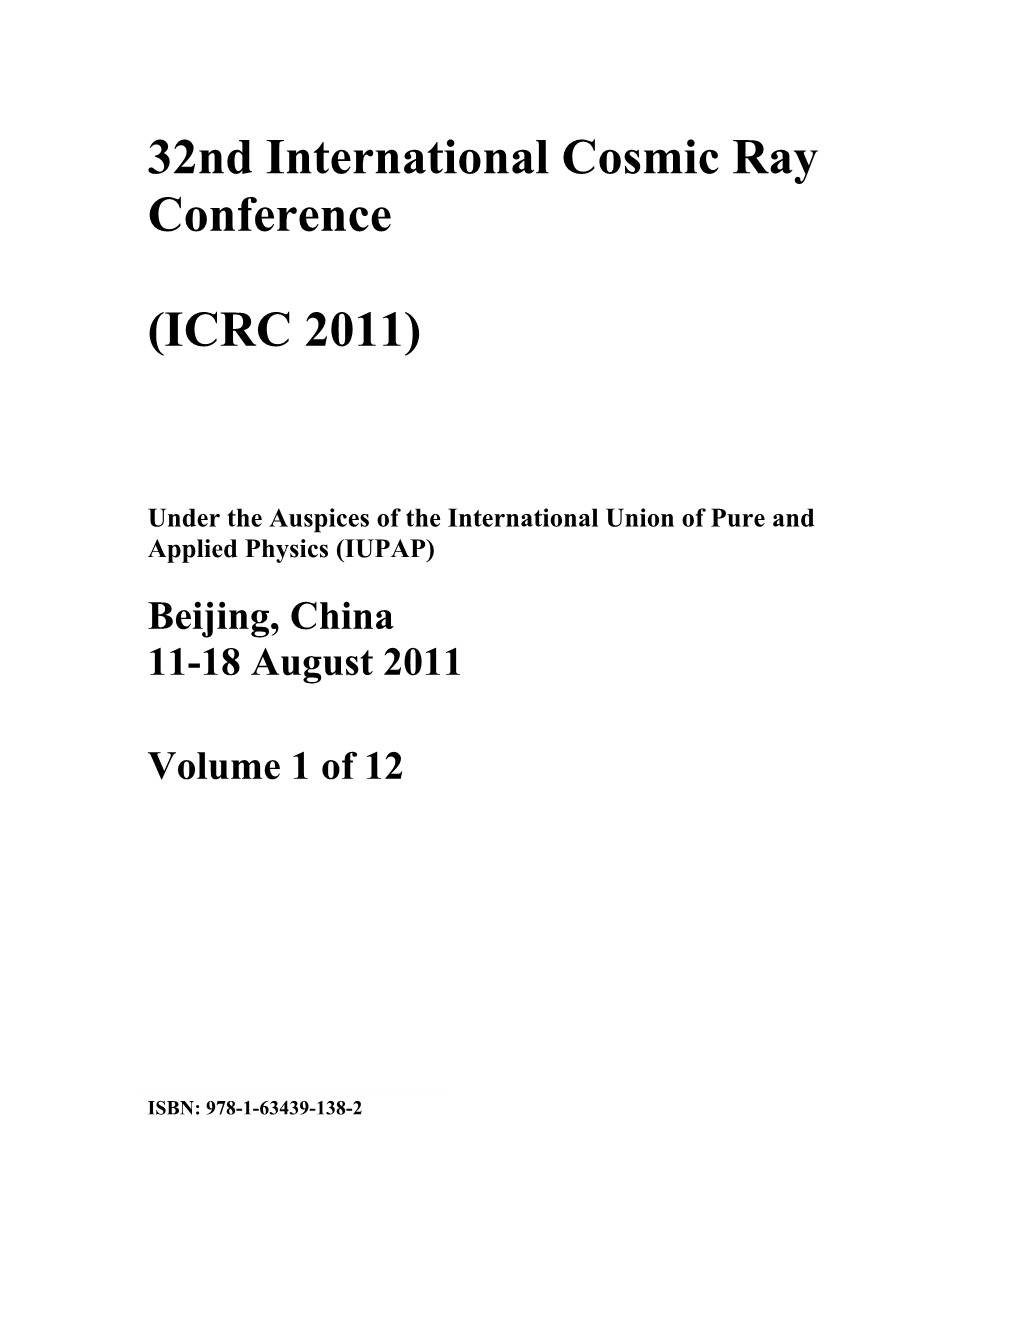 32Nd International Cosmic Ray Conference